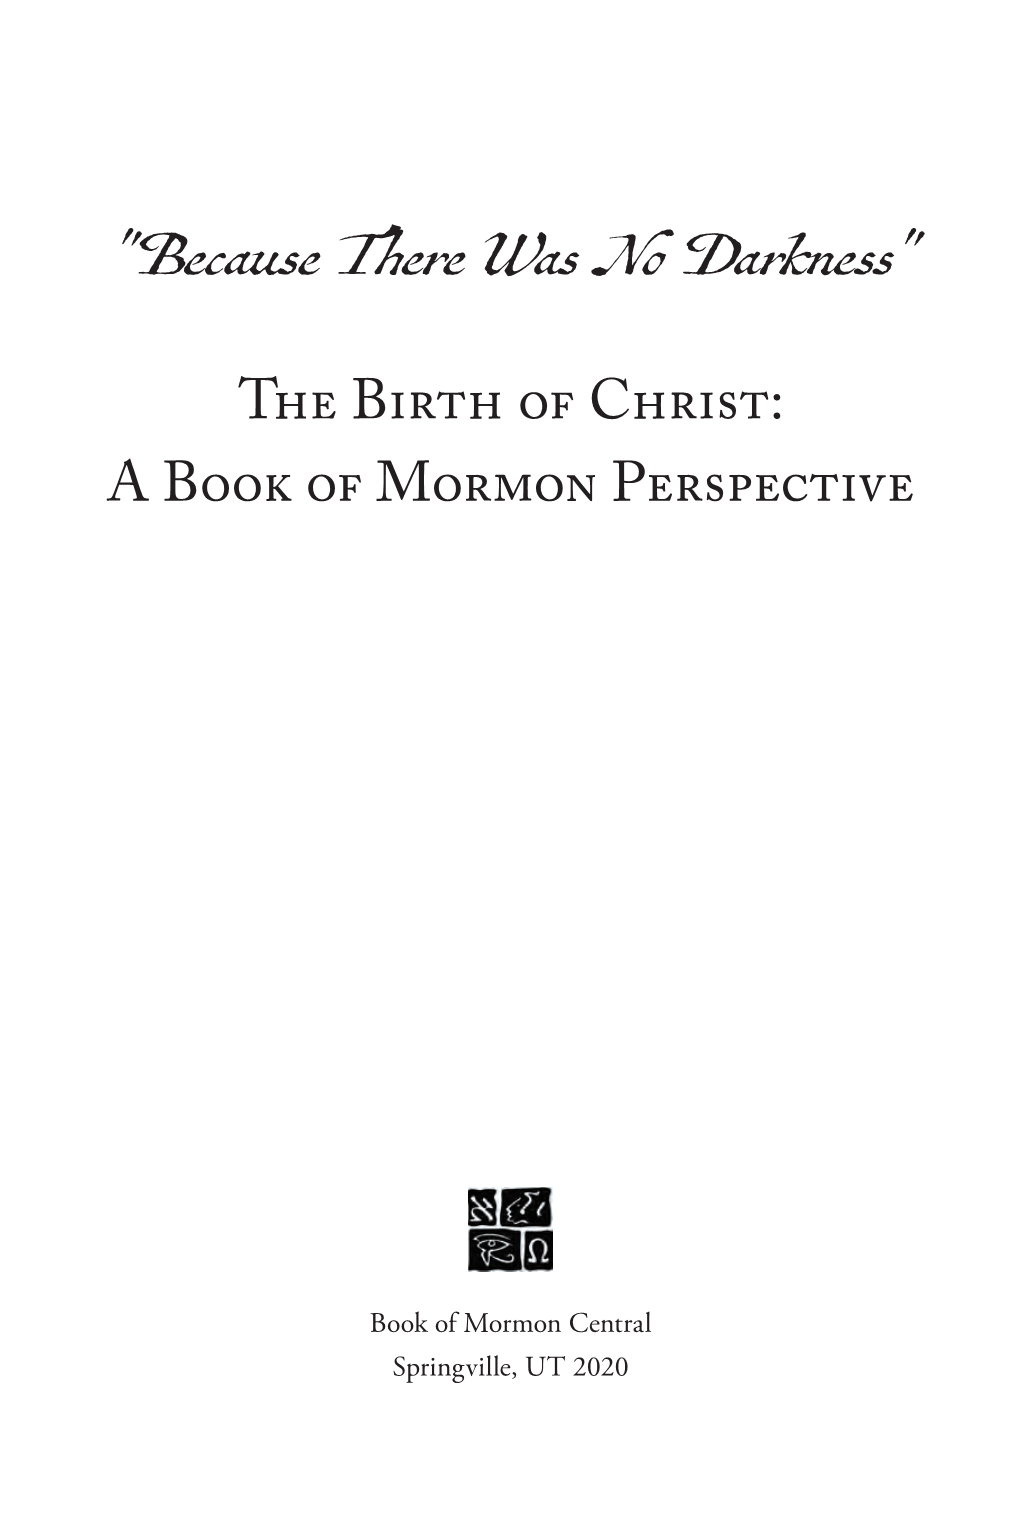 The Birth of Christ: a Book of Mormon Perspective